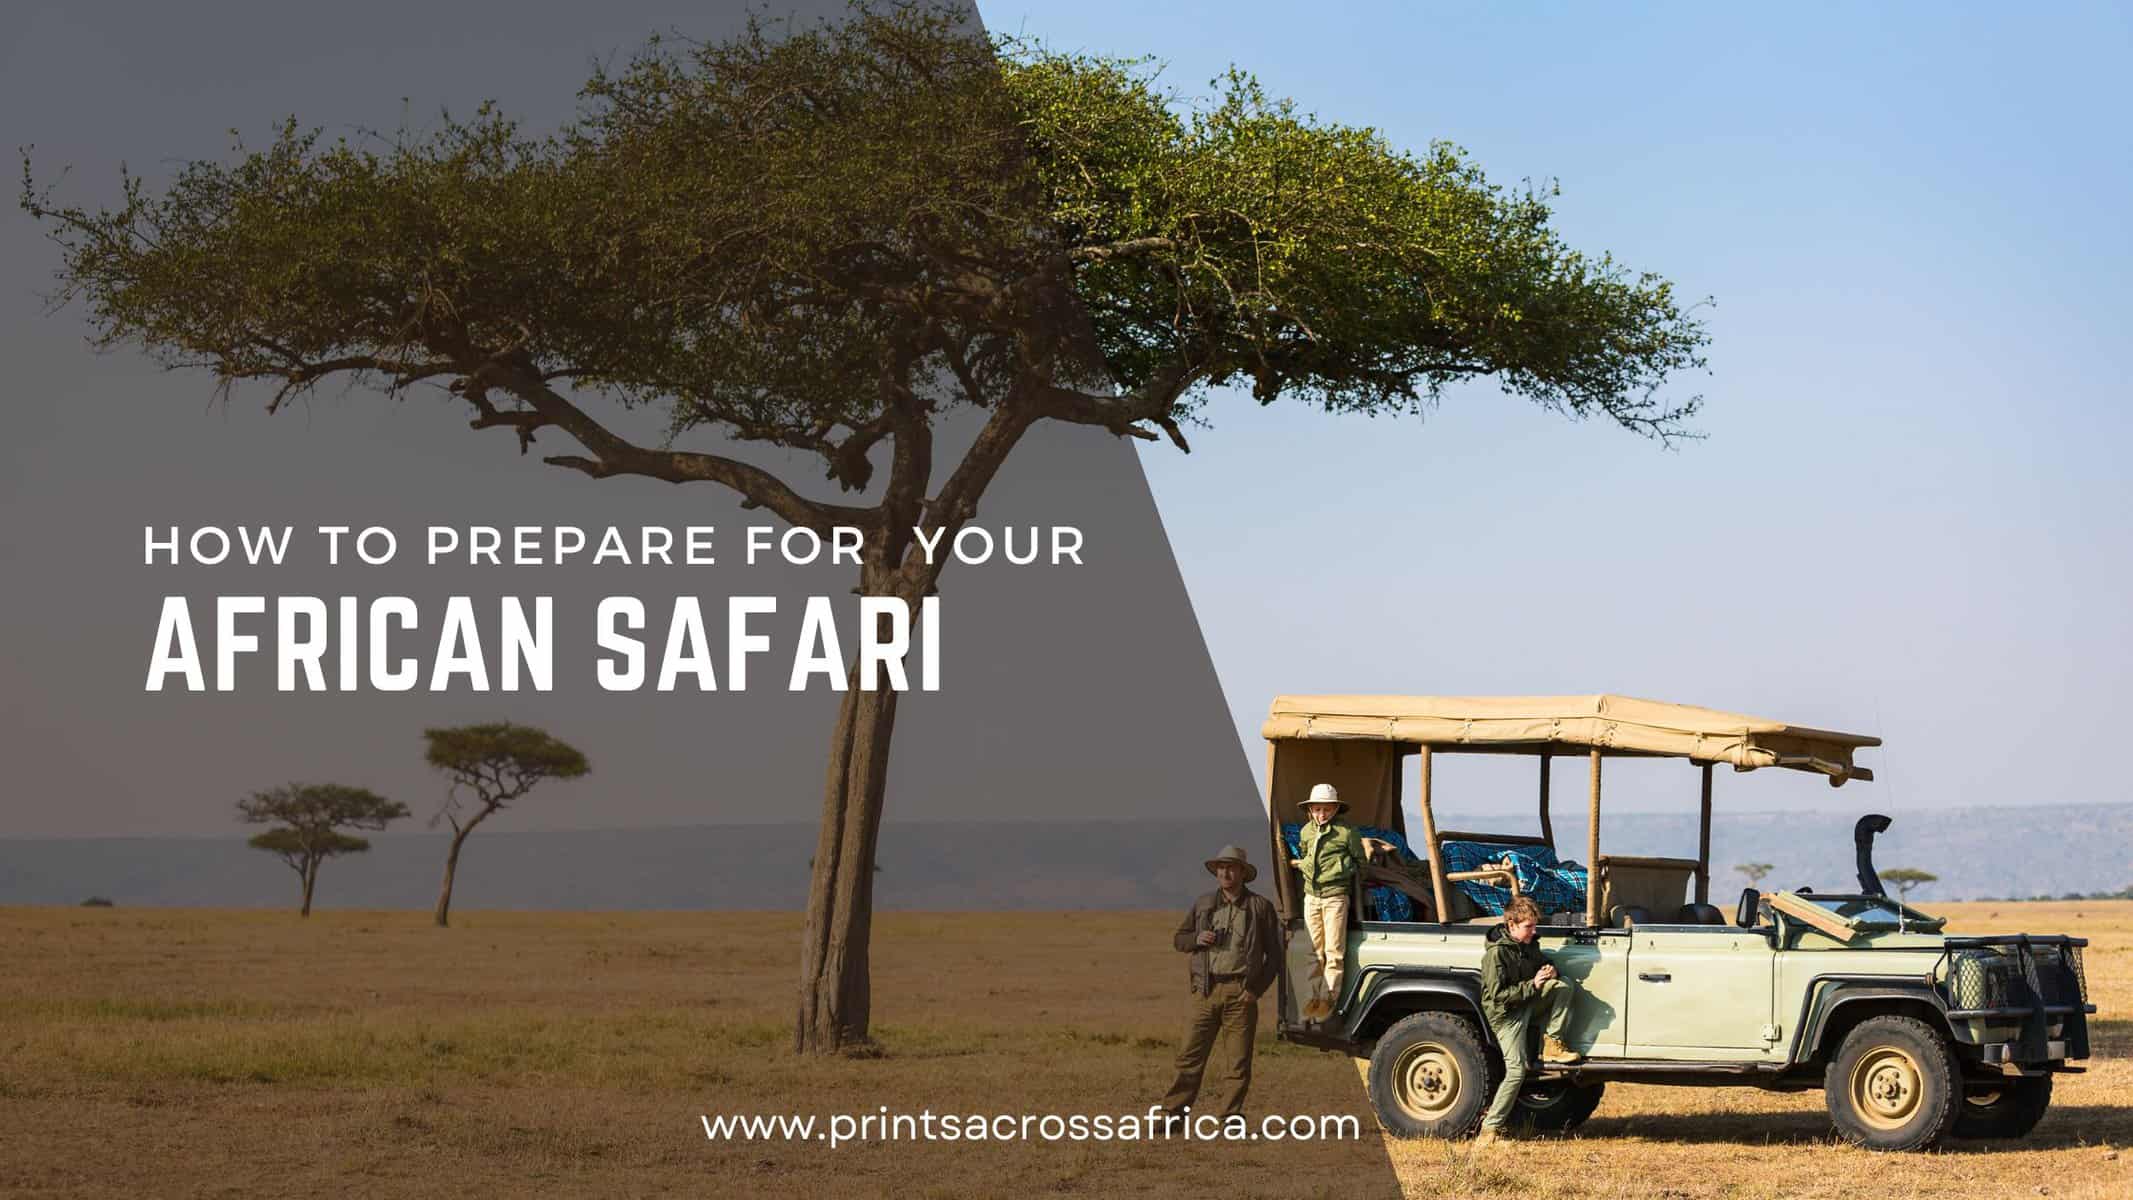 How to prepare for your African Safari